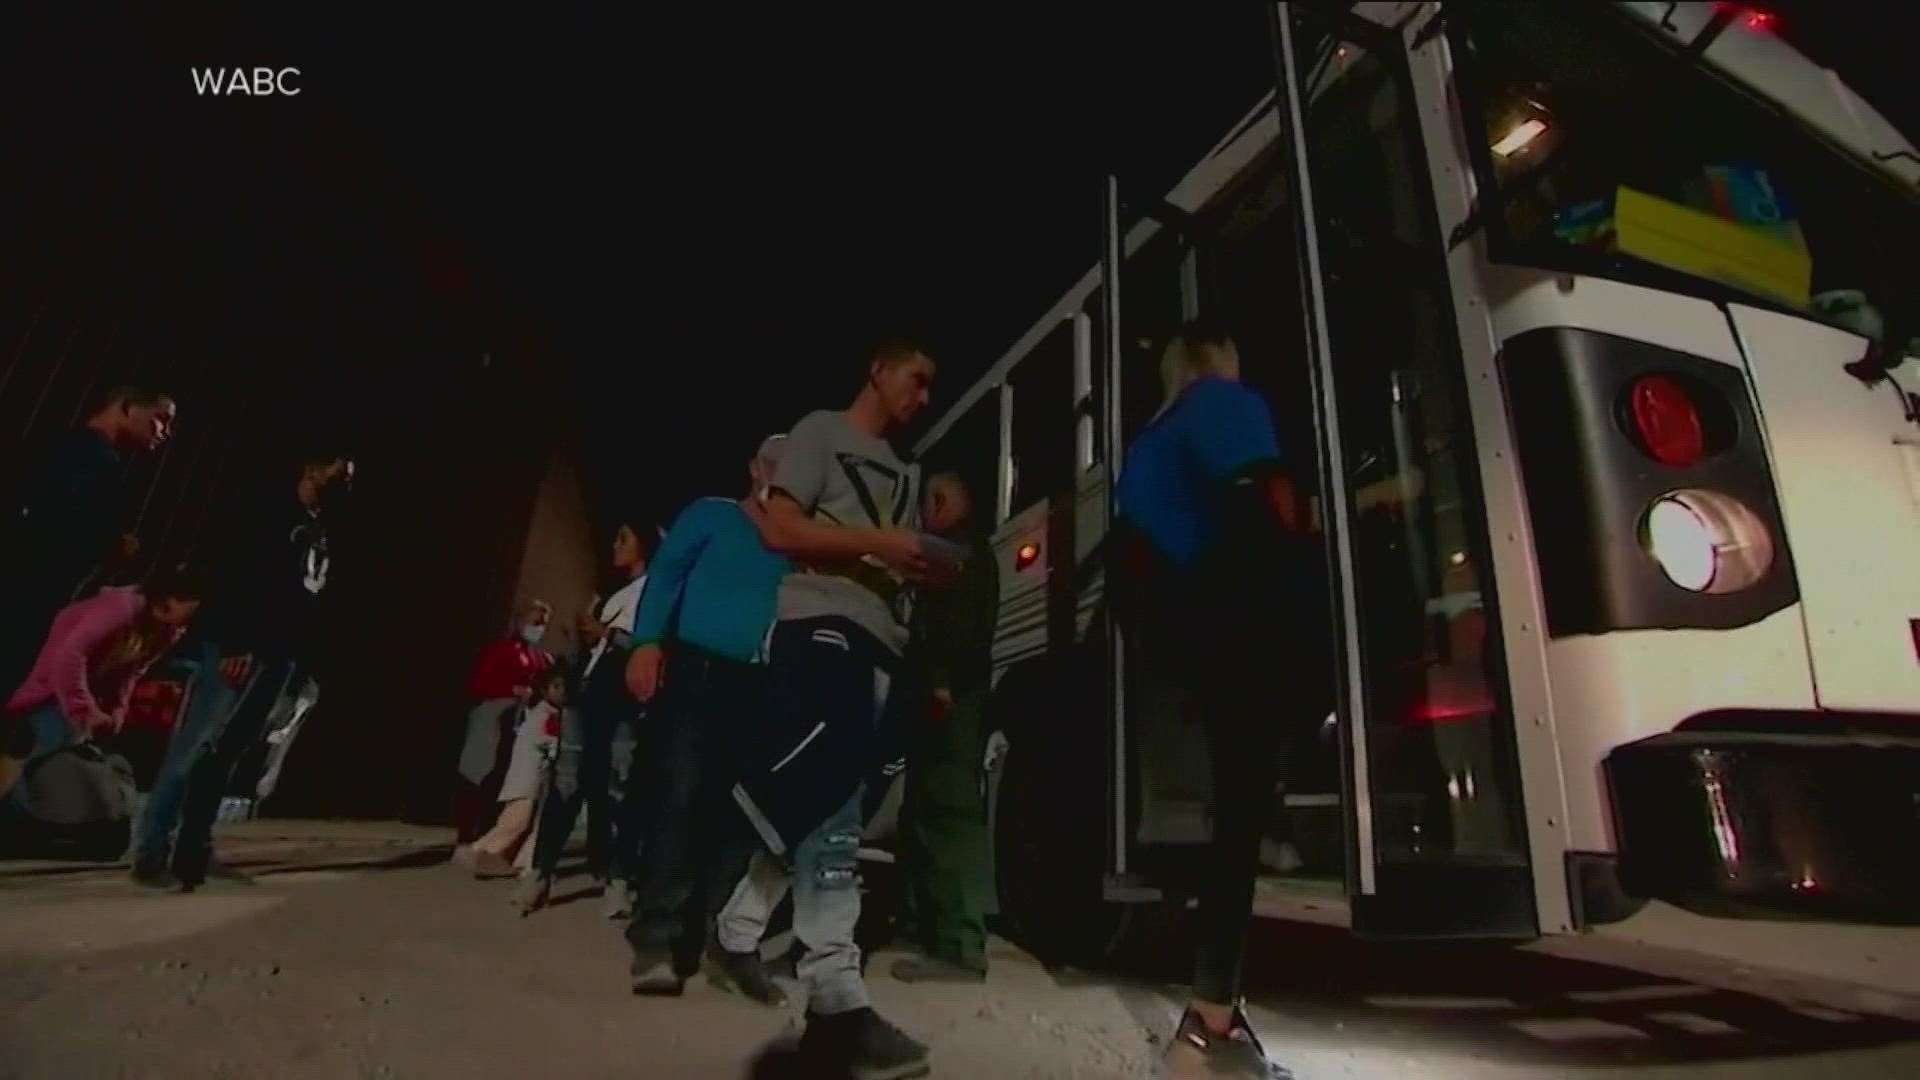 Texas is chartering buses of migrants to New York City, and the mayor is now criticizing Gov. Greg Abbott. KVUE's Natalie Haddad has the details.